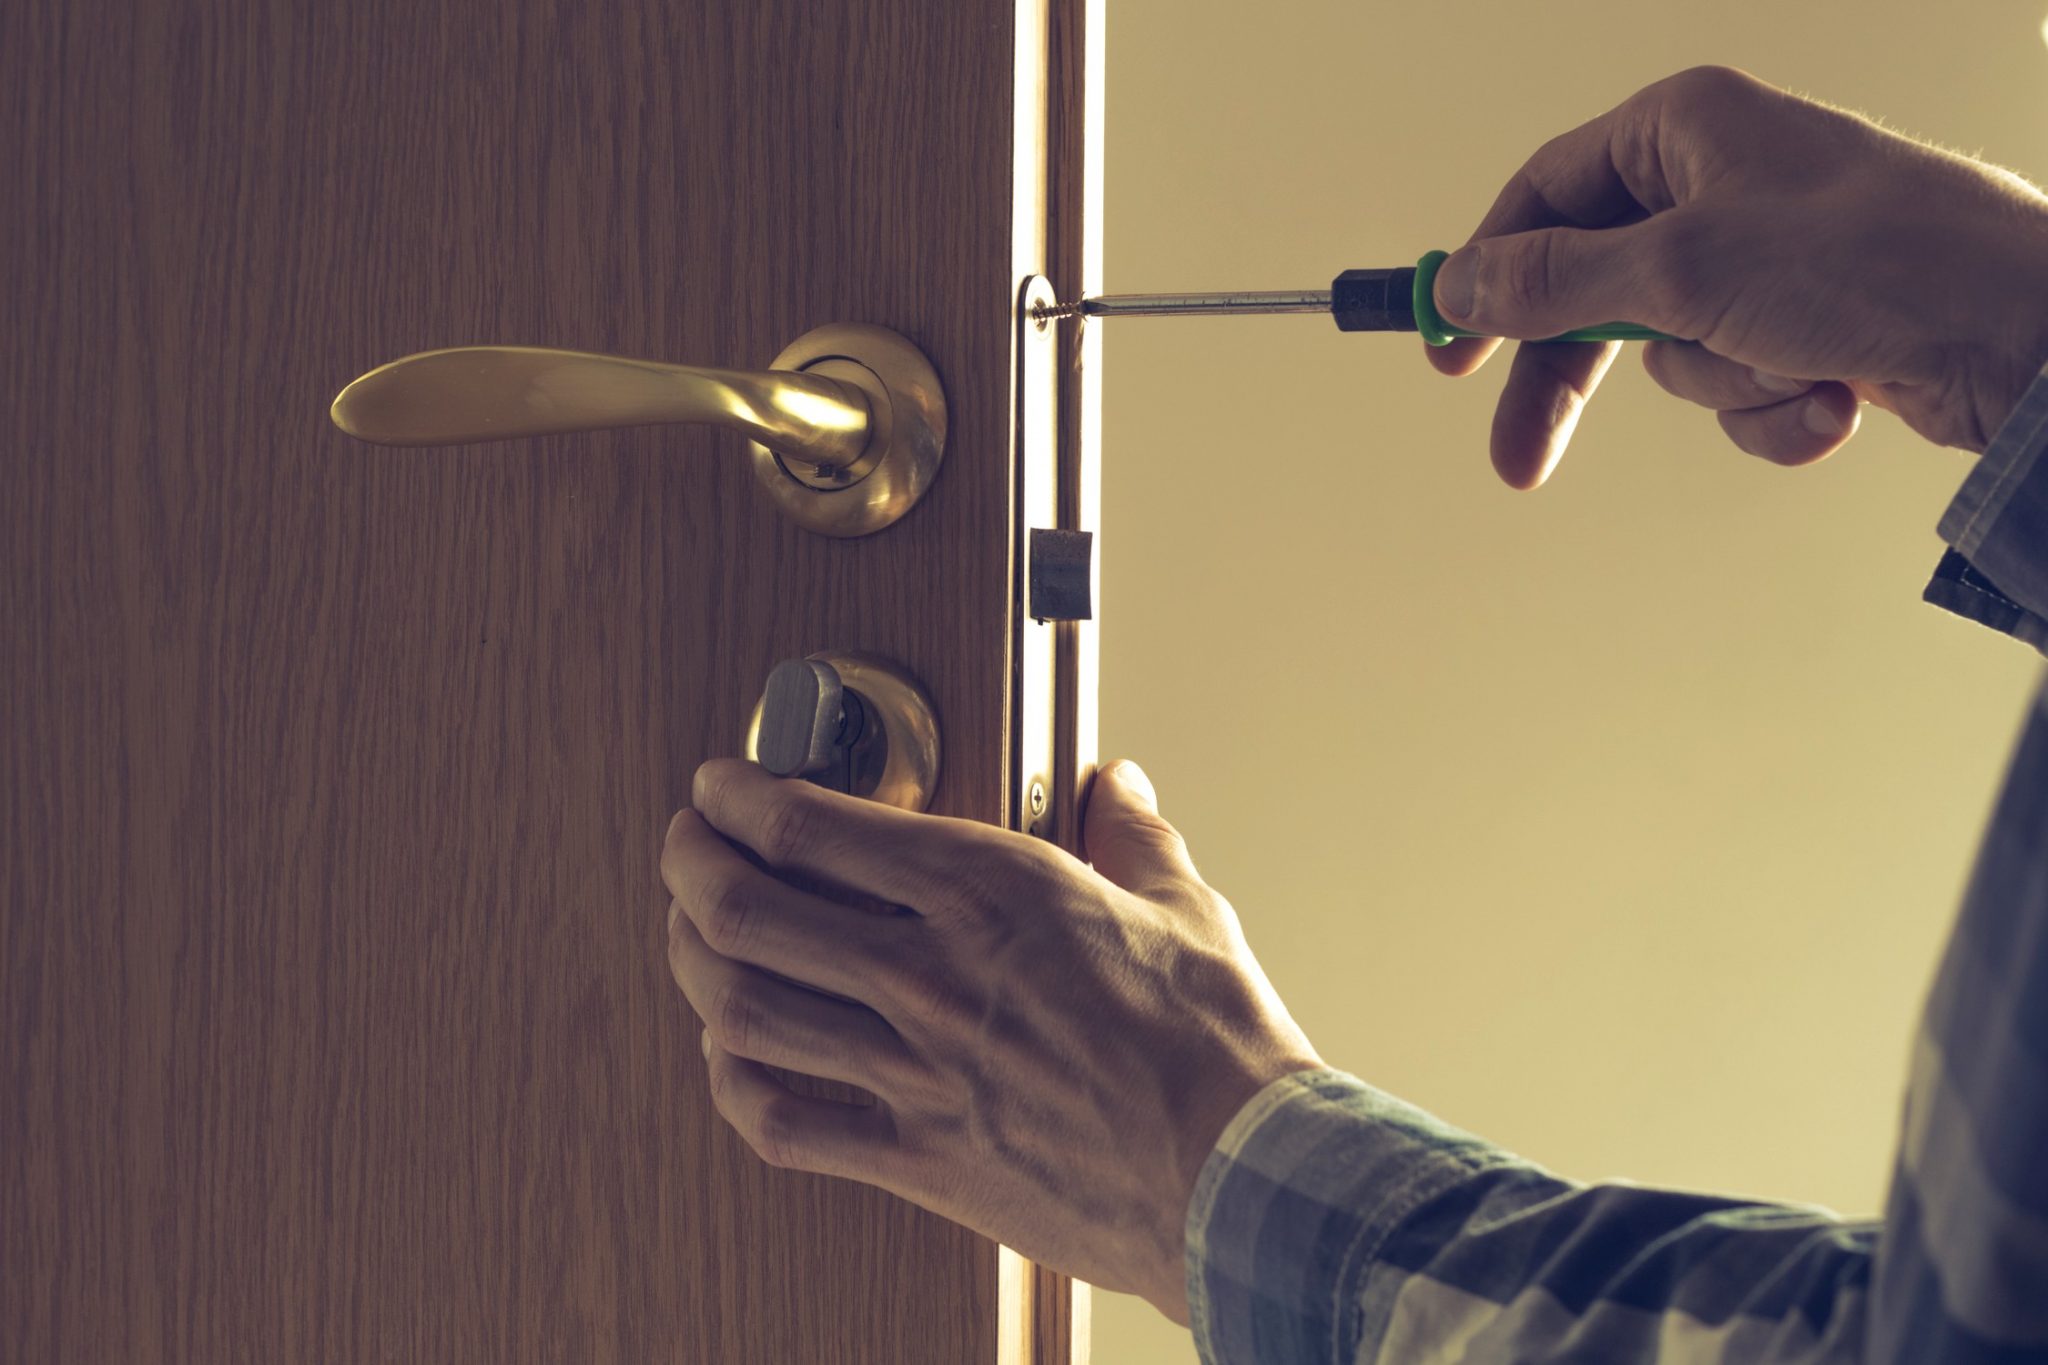 Choosing The Best Locksmith Services in Kent WA For Your Business